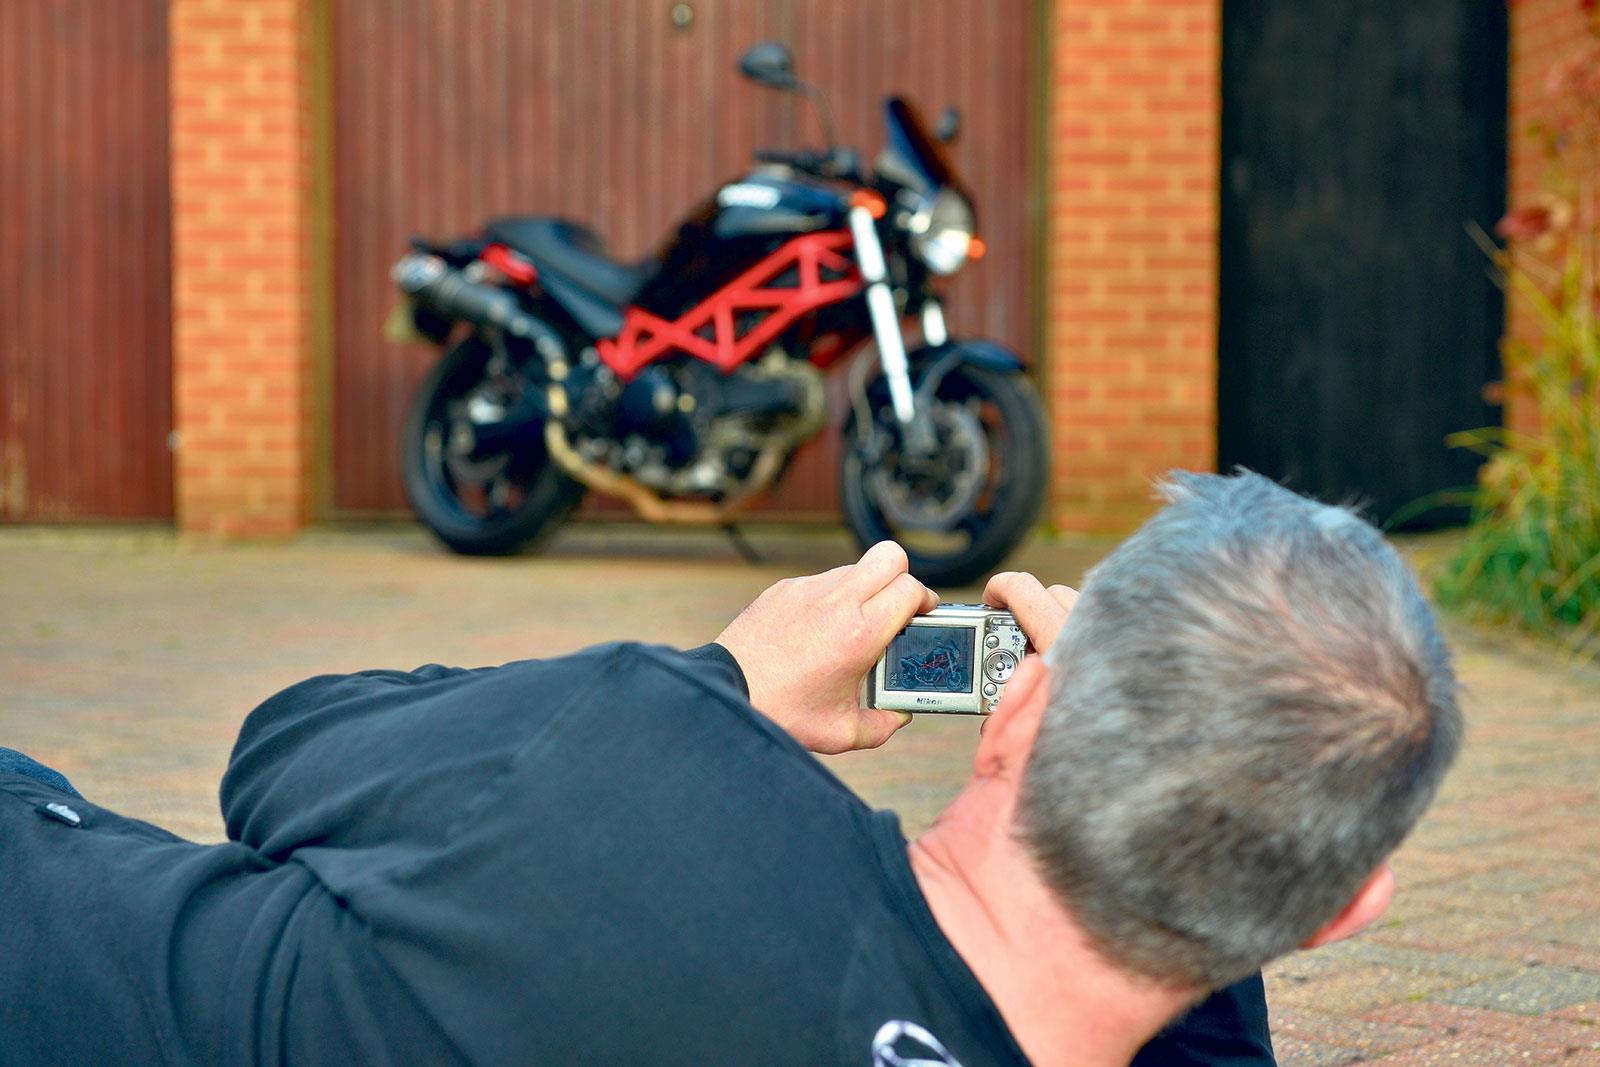 Get the most from selling your bike | MCN